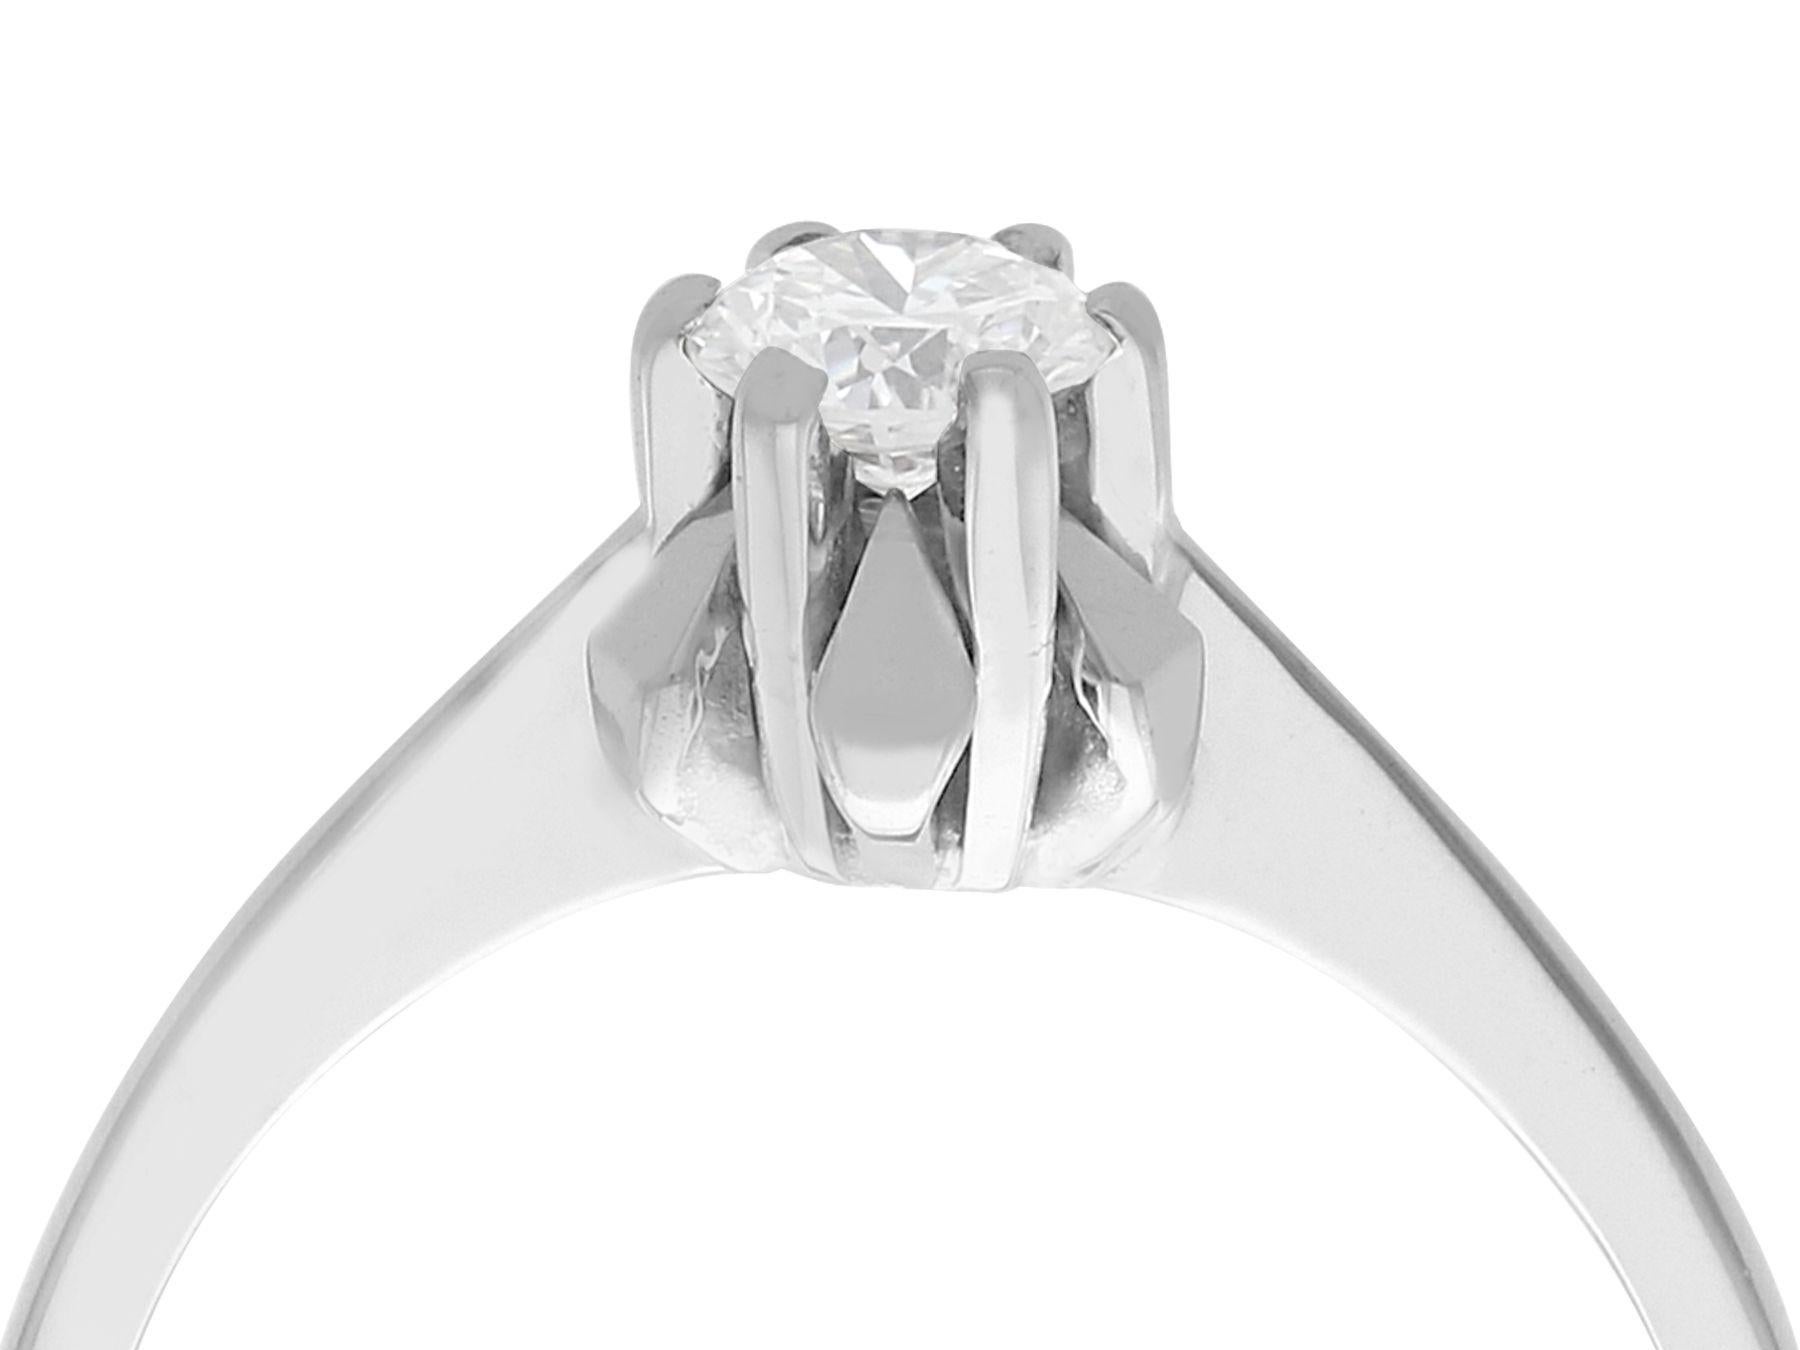 An impressive 0.35 carat diamond and 18 karat white gold solitaire style engagement ring; part of our diverse antique jewelry and estate jewelry collections.

This fine and impressive diamond solitaire ring has been crafted in 18k white gold.

The